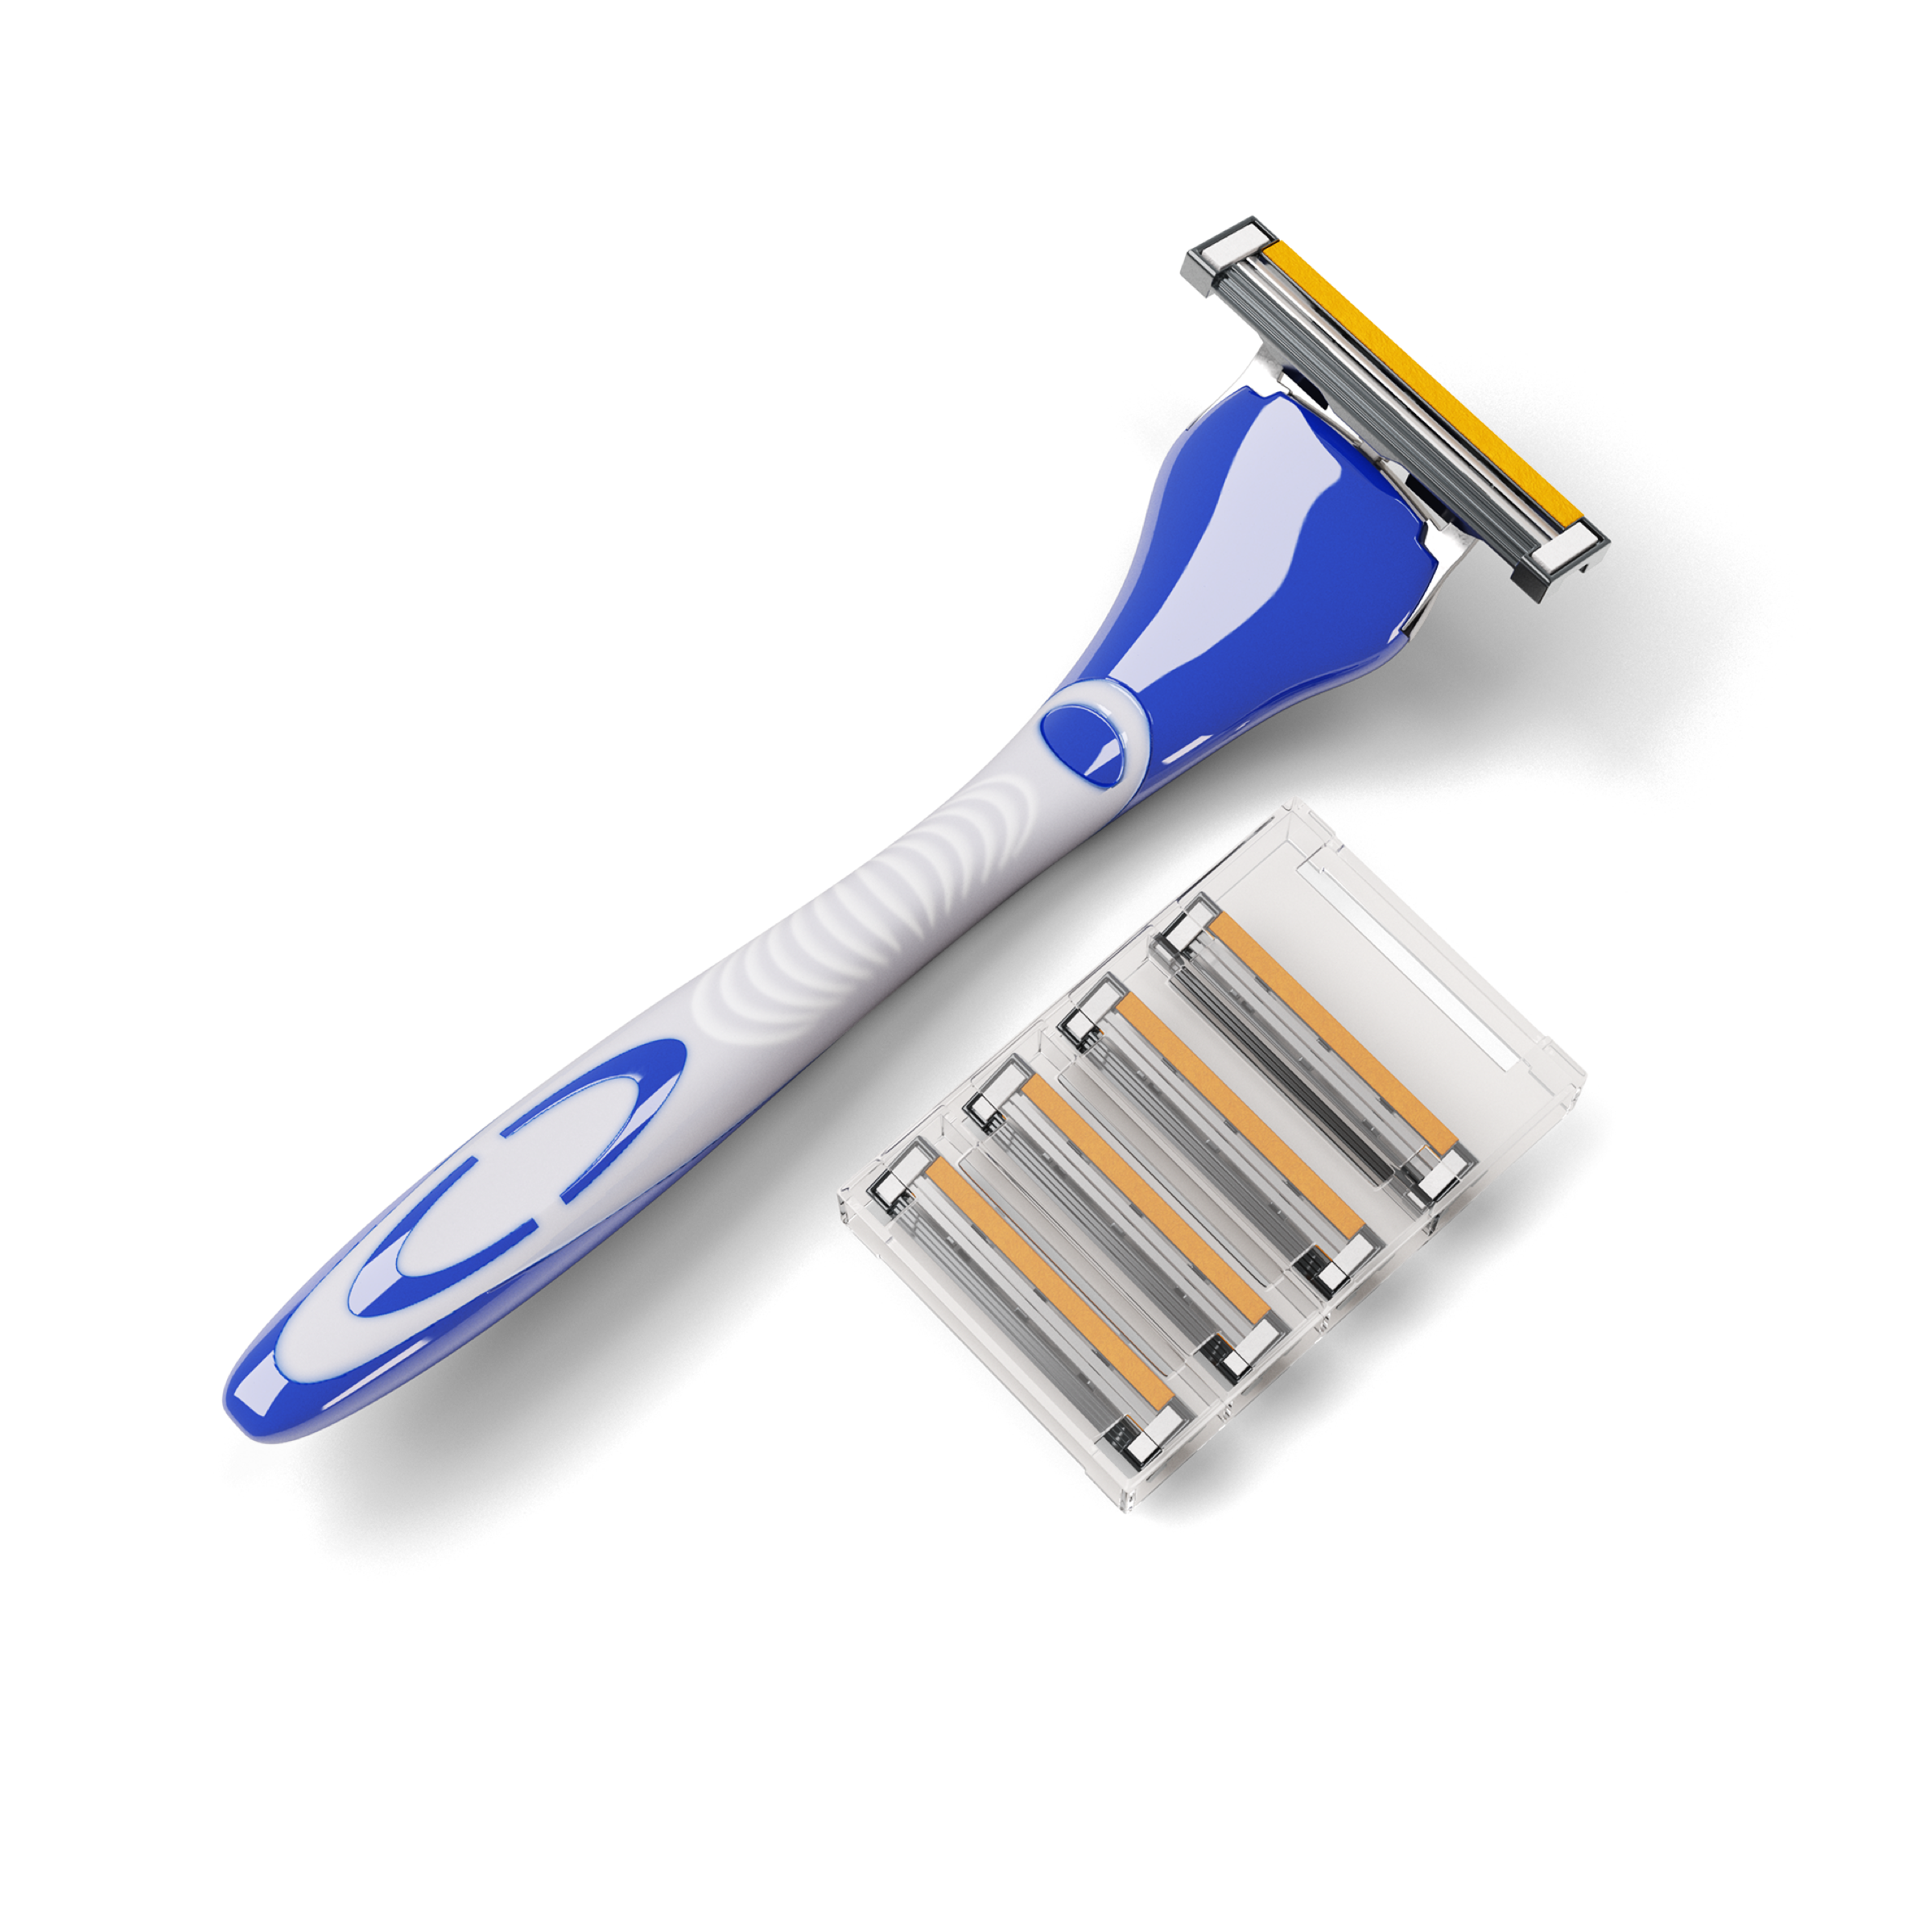 Dollar Shave Club Humble Twin Series Two blade razor blade and handle product image with white backdrop.